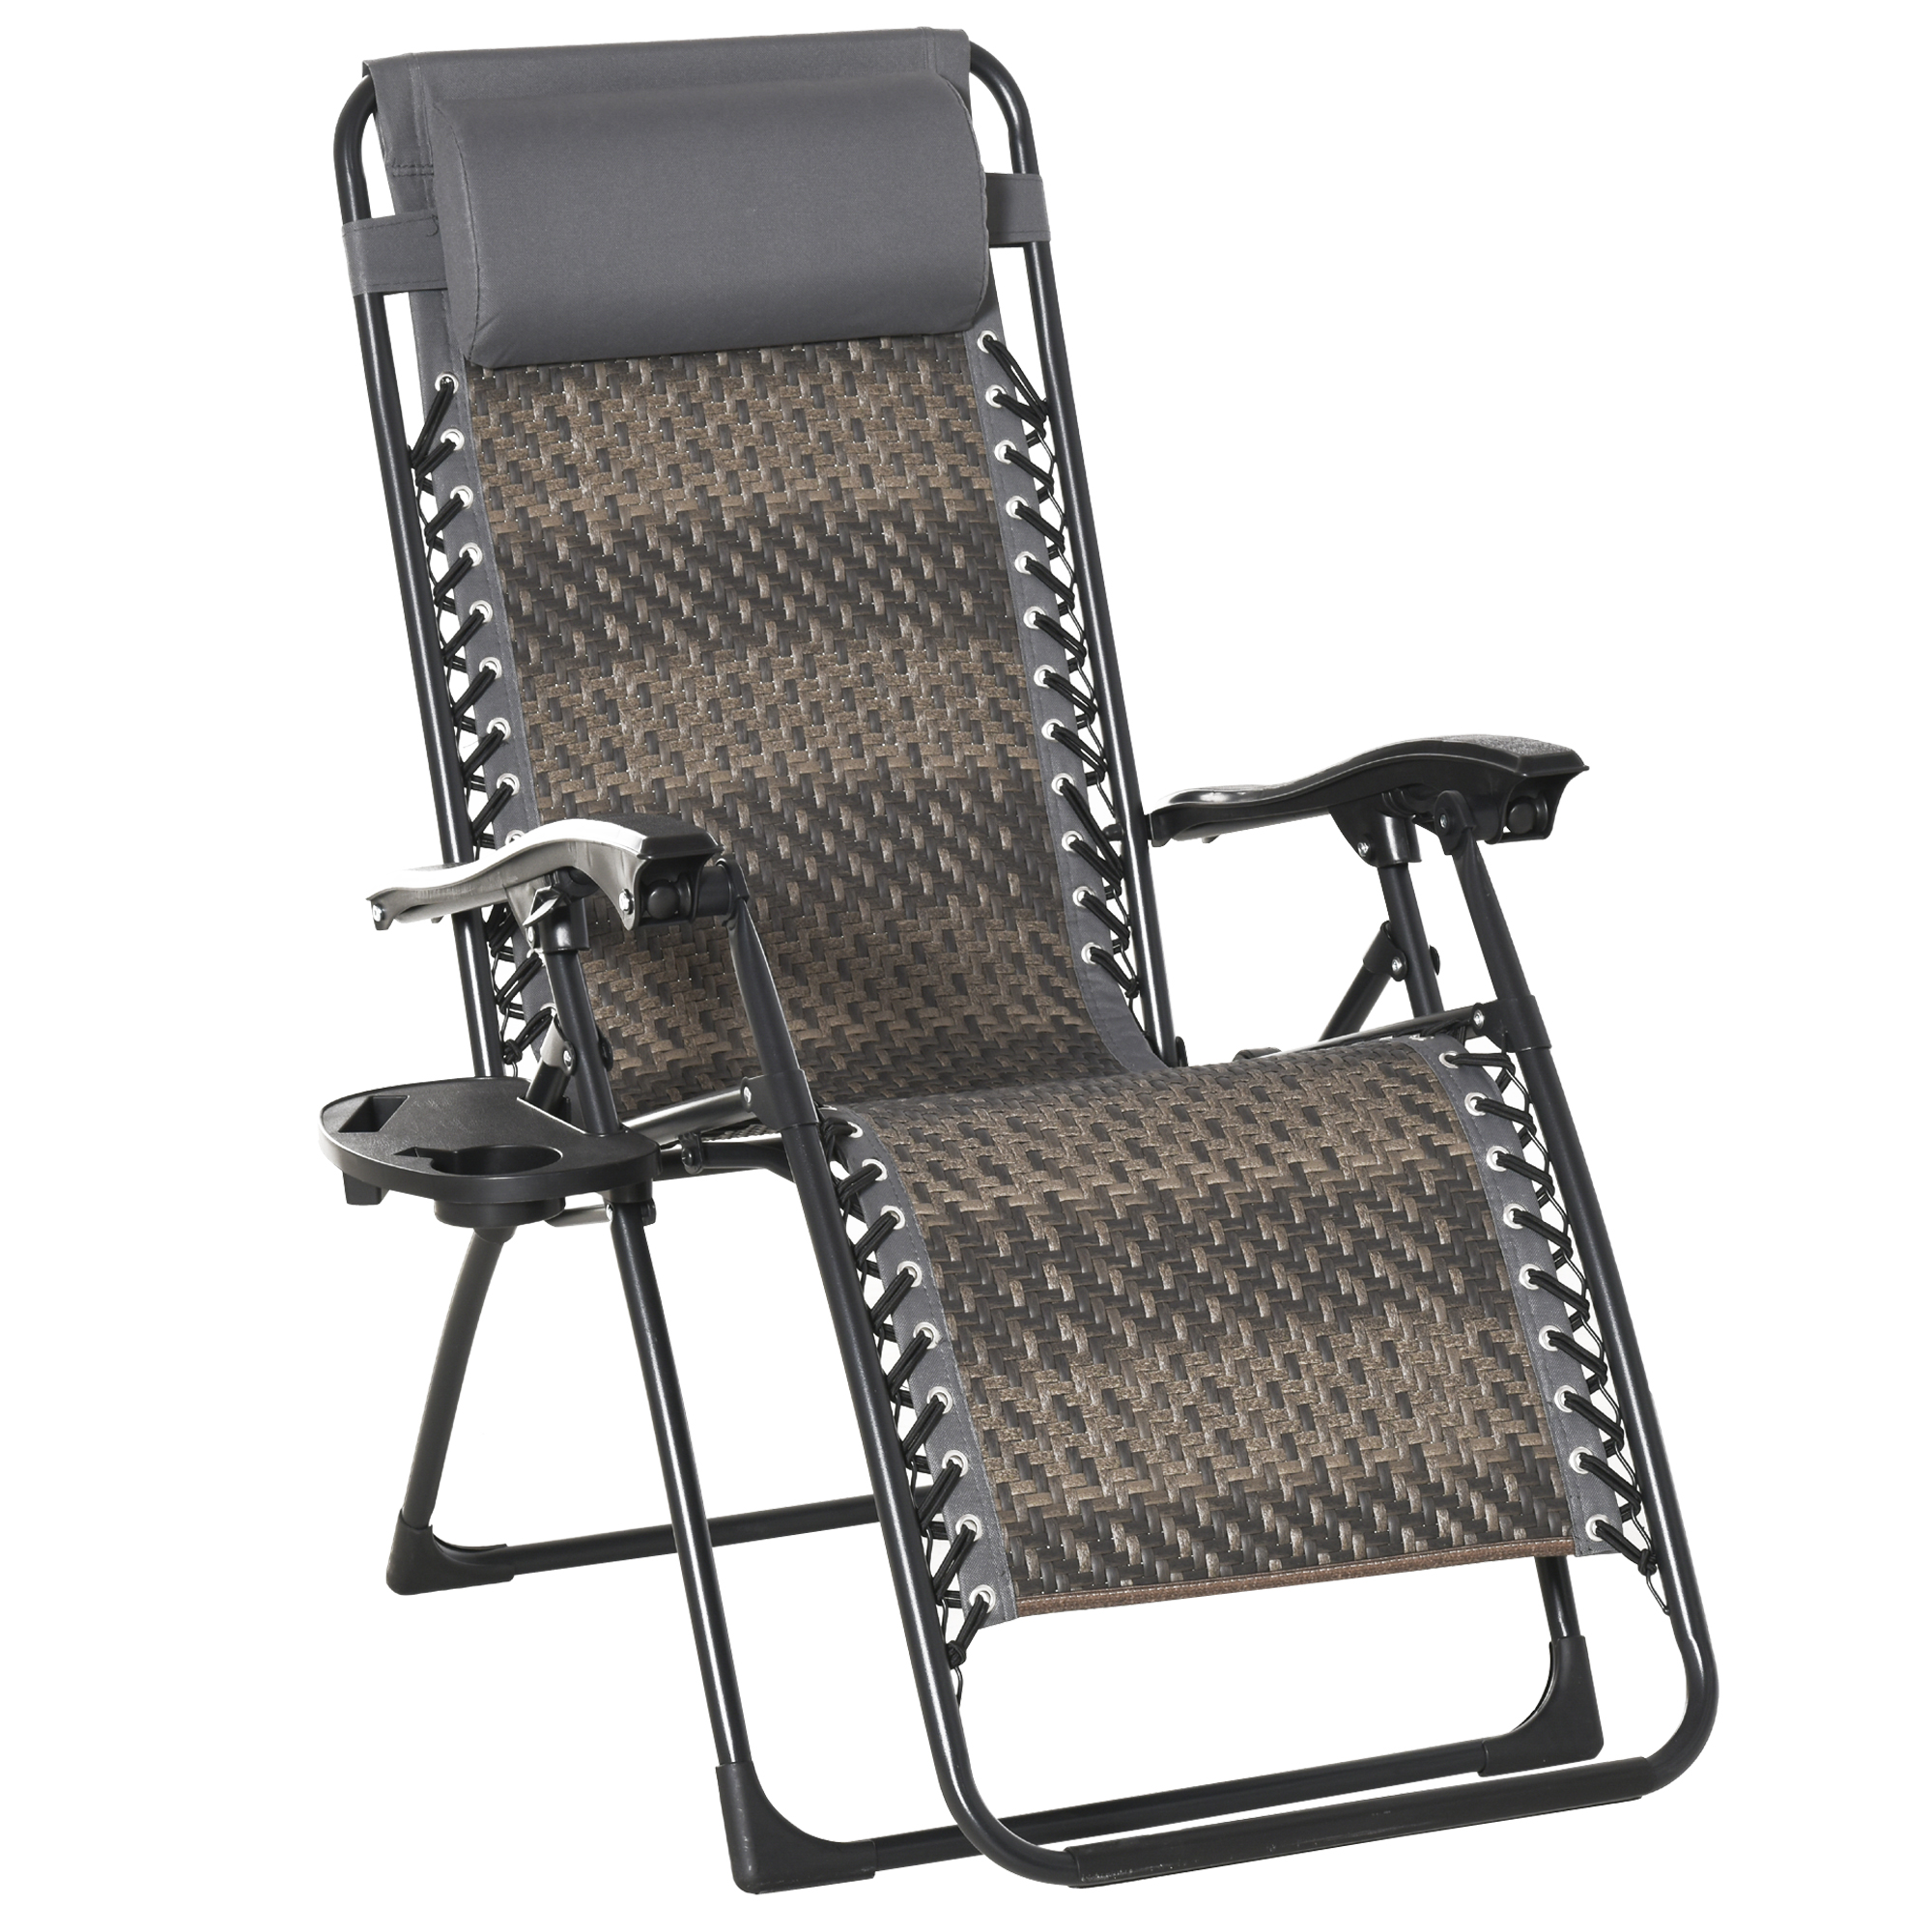 Outsunny 1 Pack Utility Tray Steel Zero-Gravity Chair - Gray - image 1 of 9